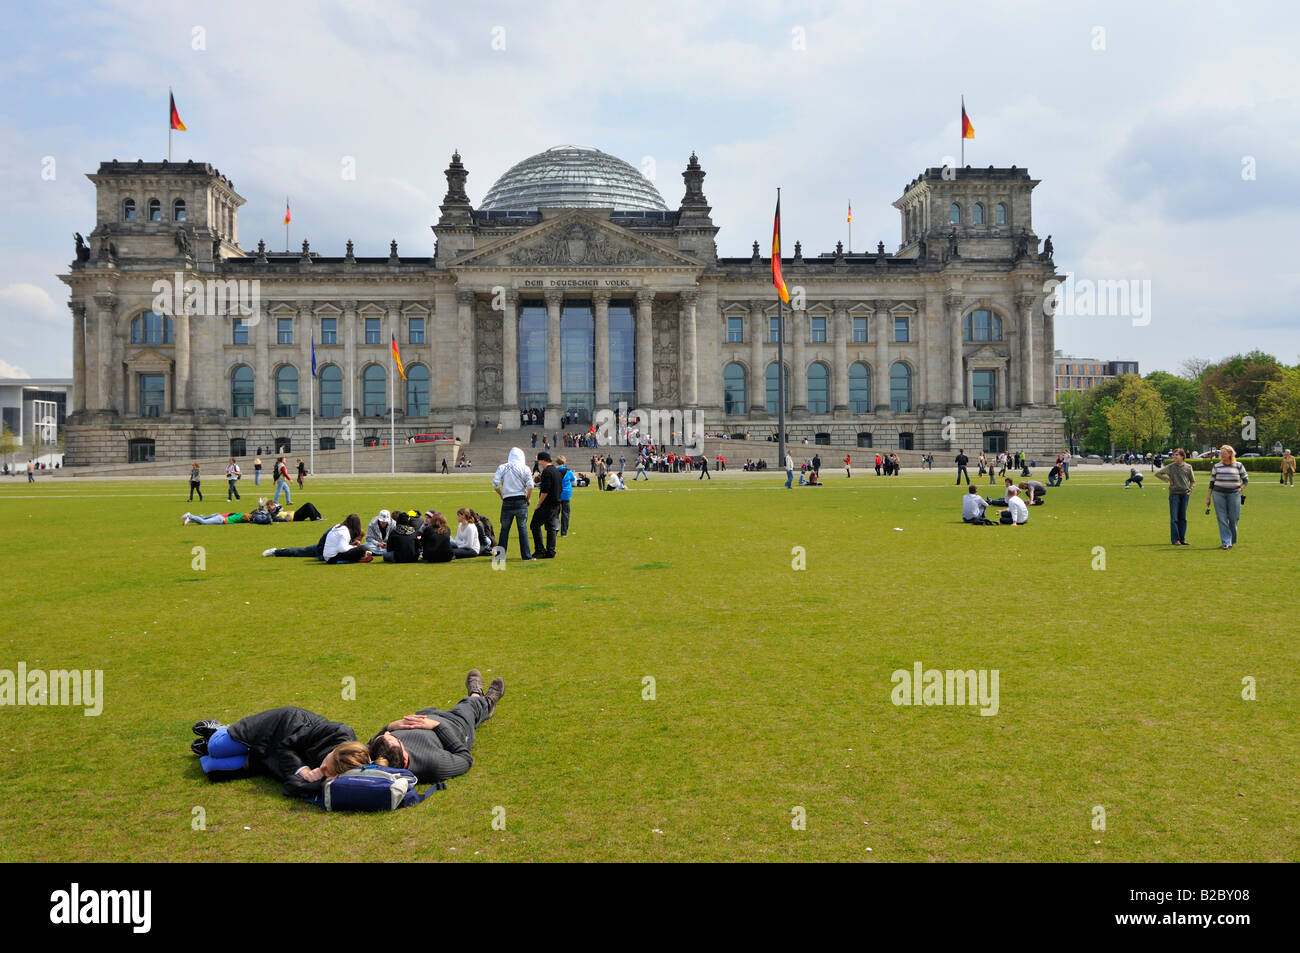 Tourists on the Platz der Republik in front of the Reichstag, German parliament building, Berlin, Germany, Europe Stock Photo